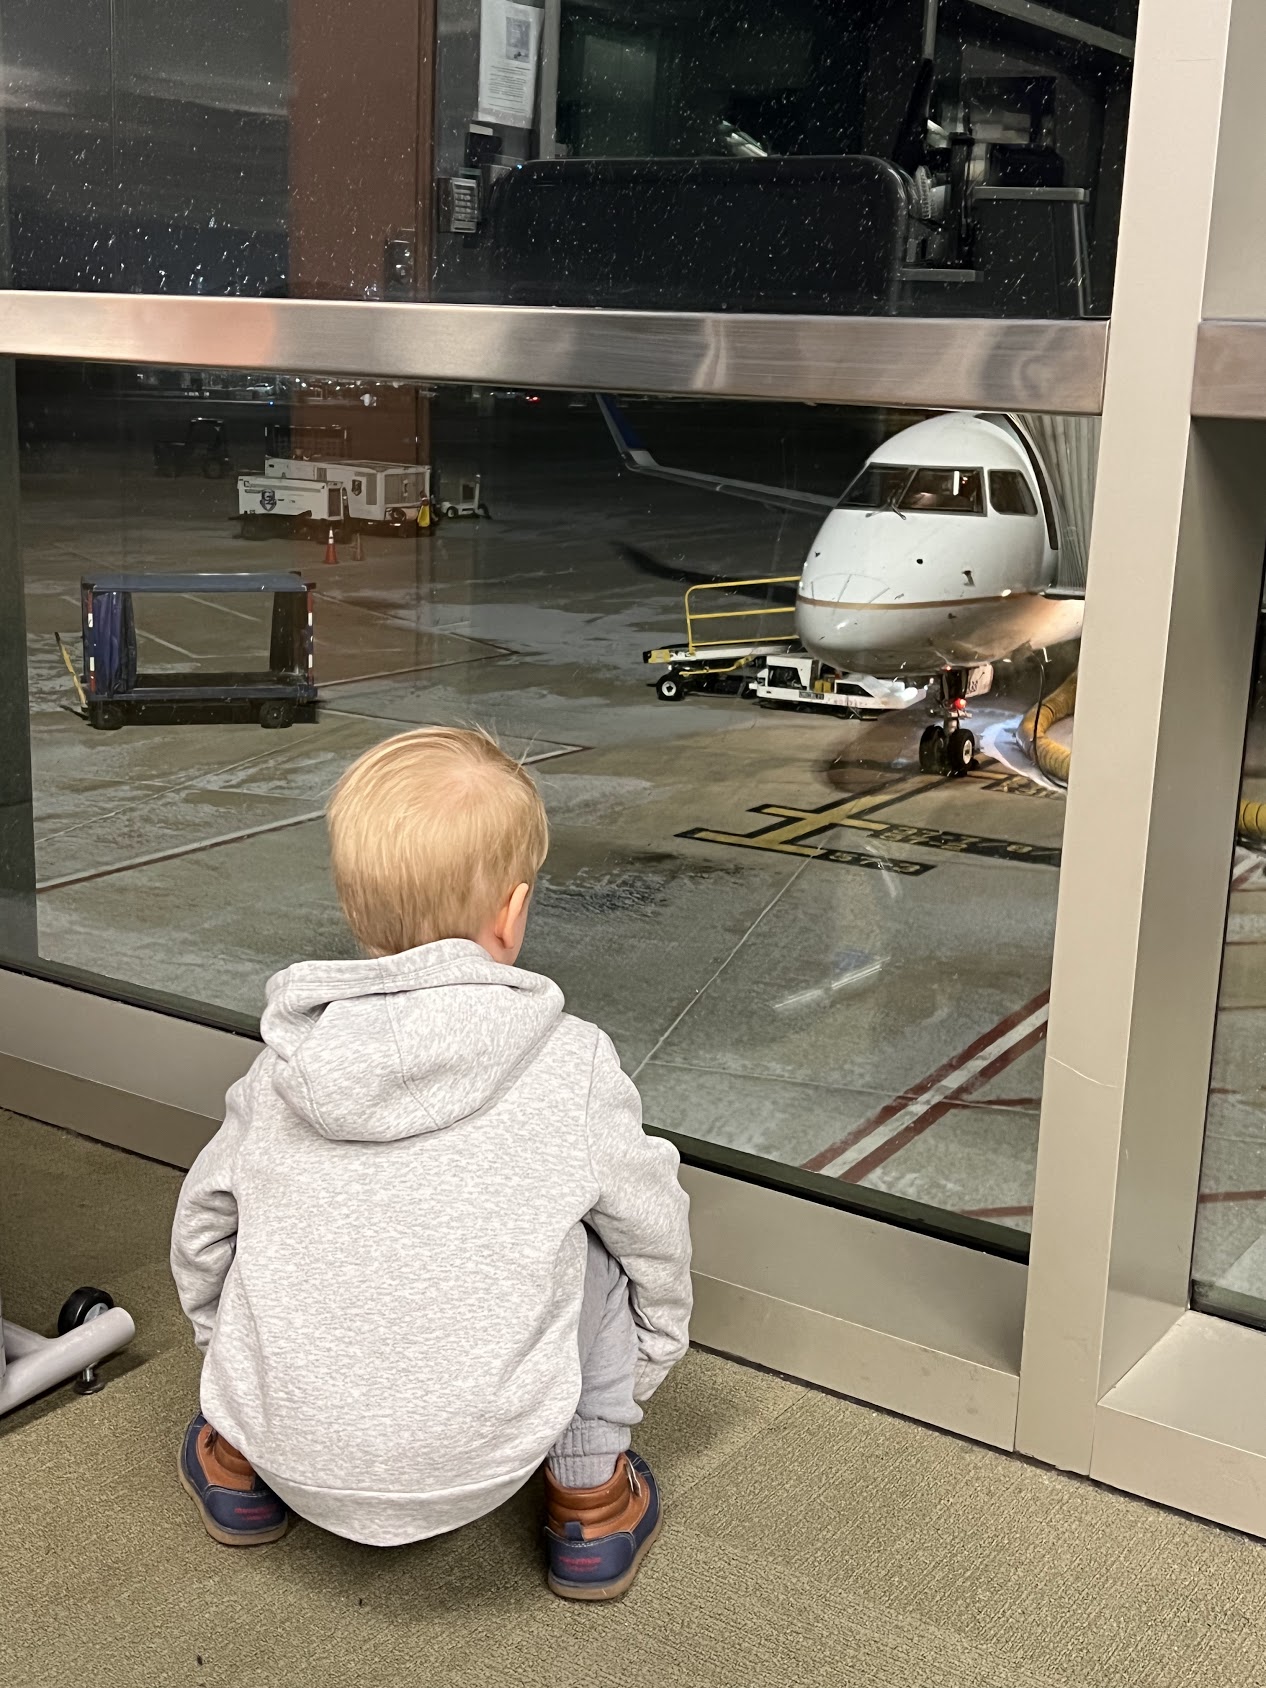 a boy sitting on the floor looking at an airplane